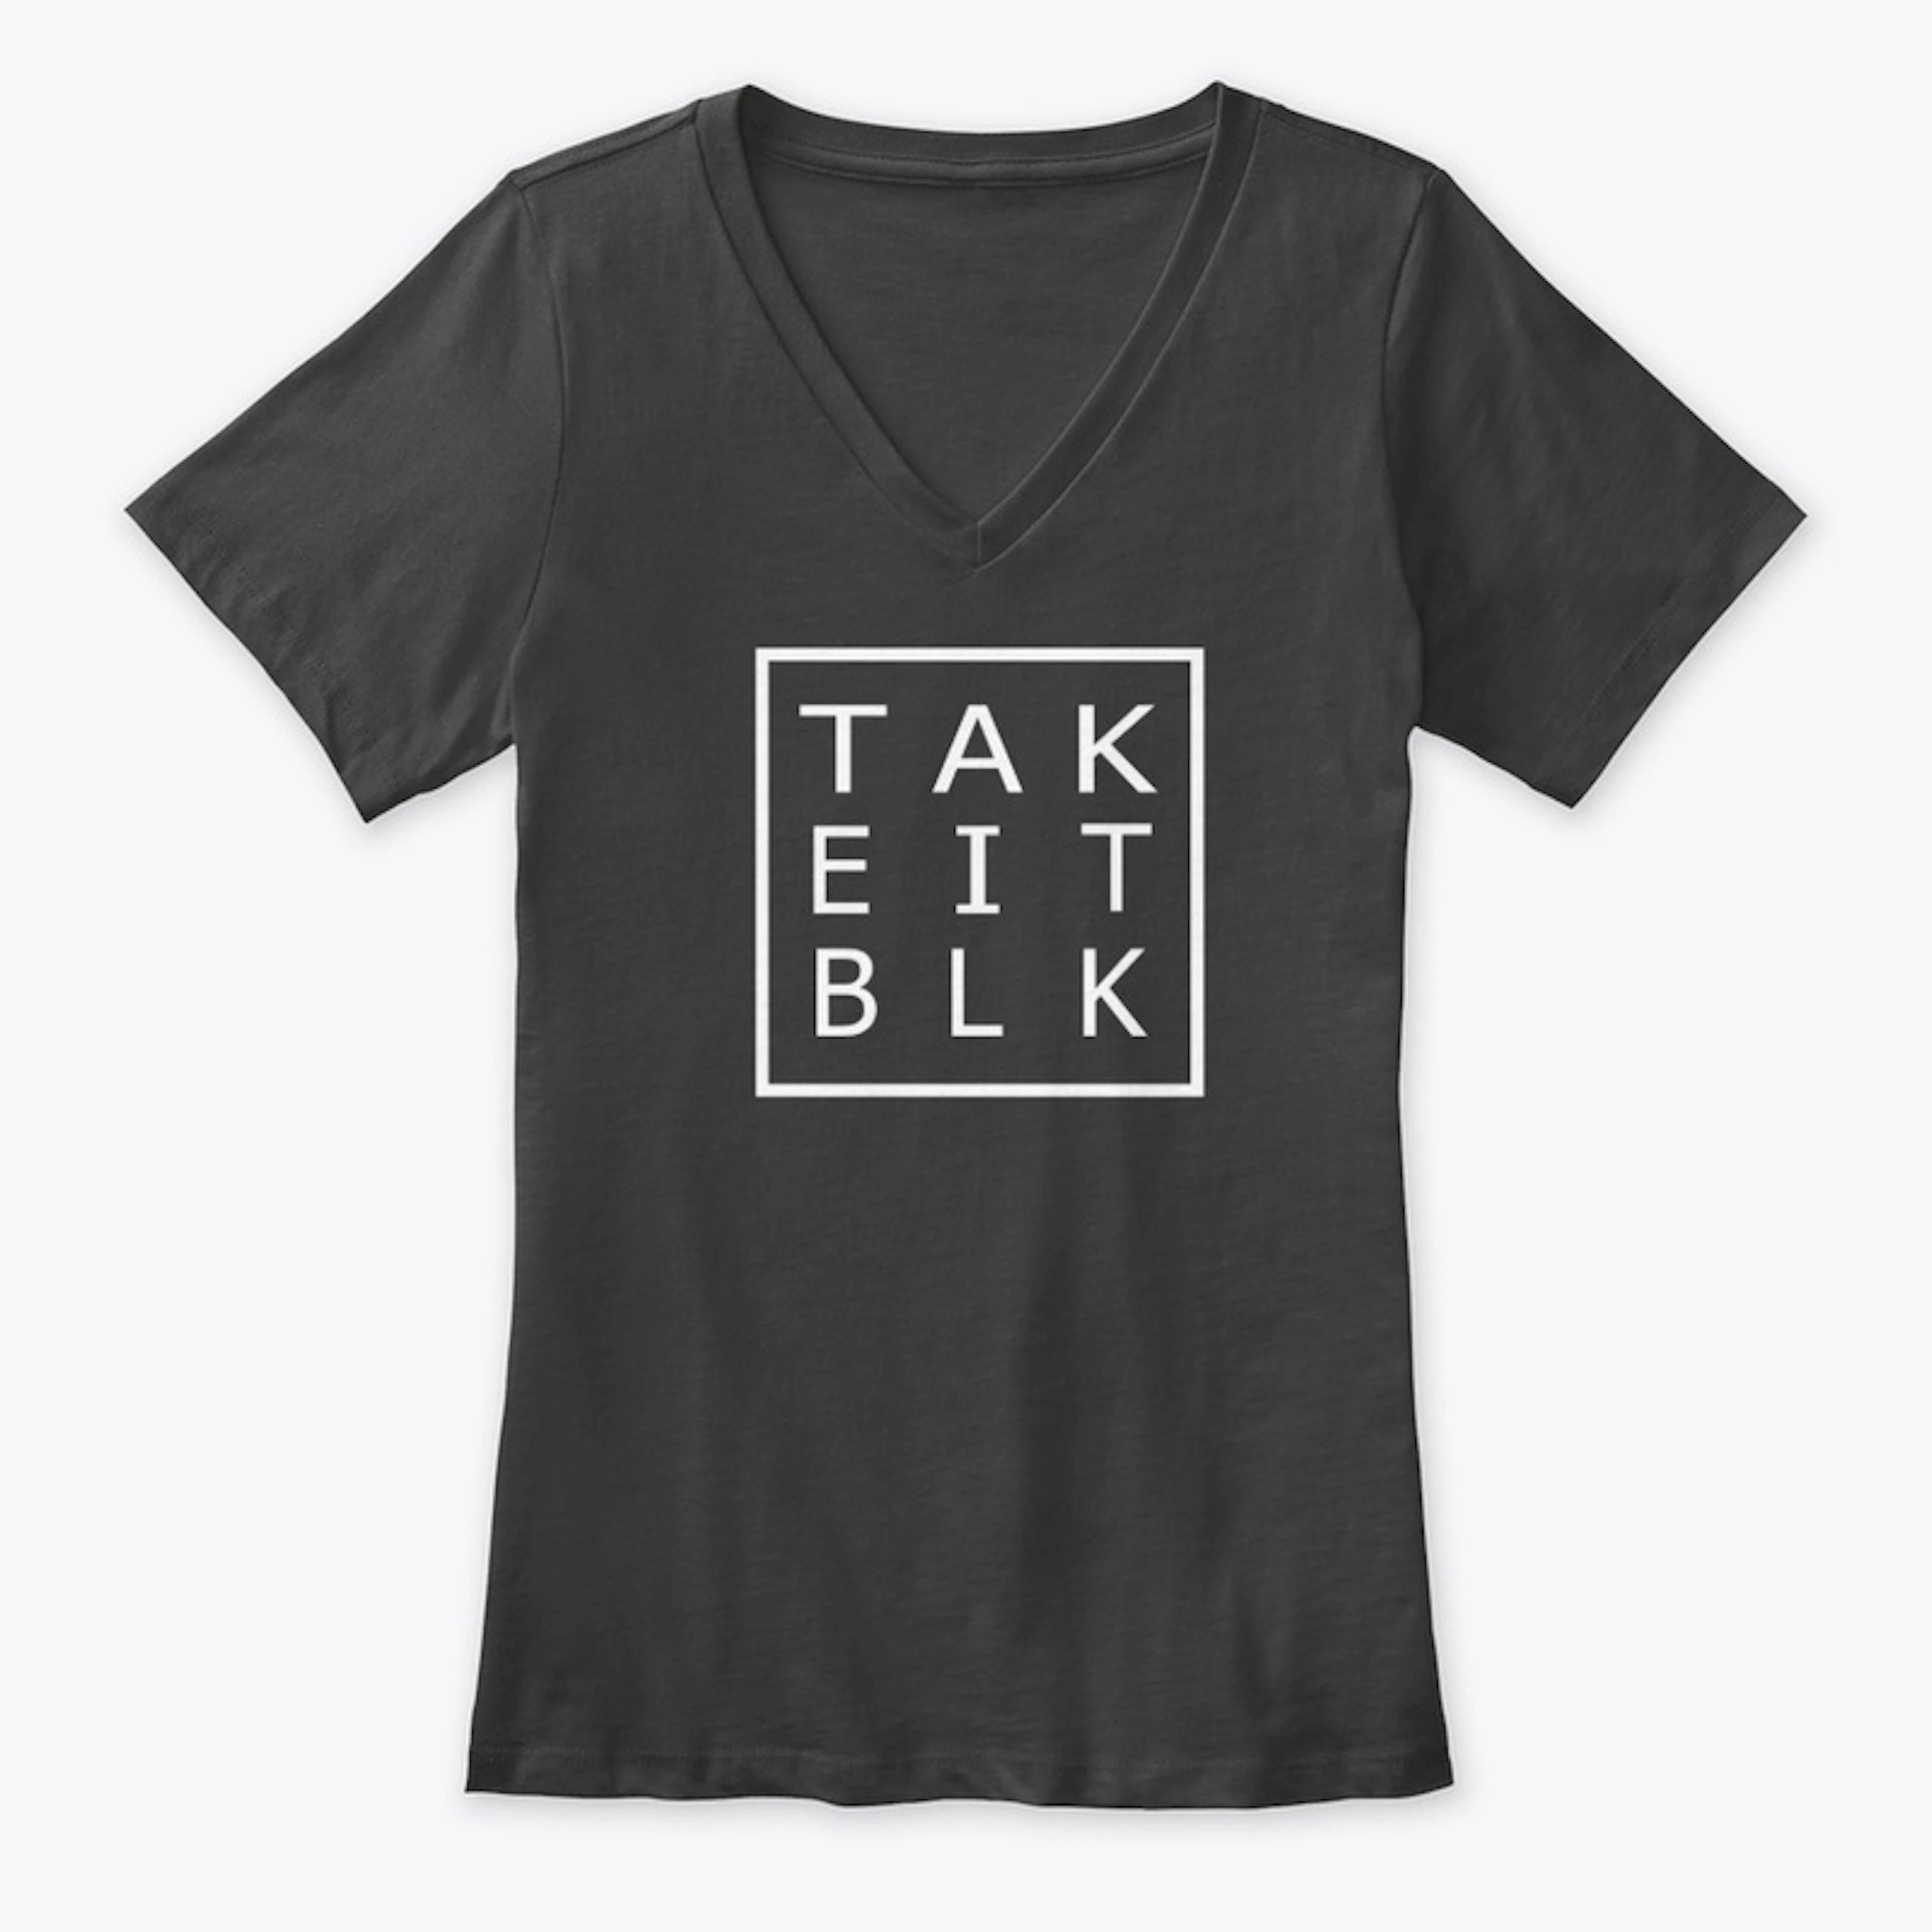 We built this #TakeItBlk